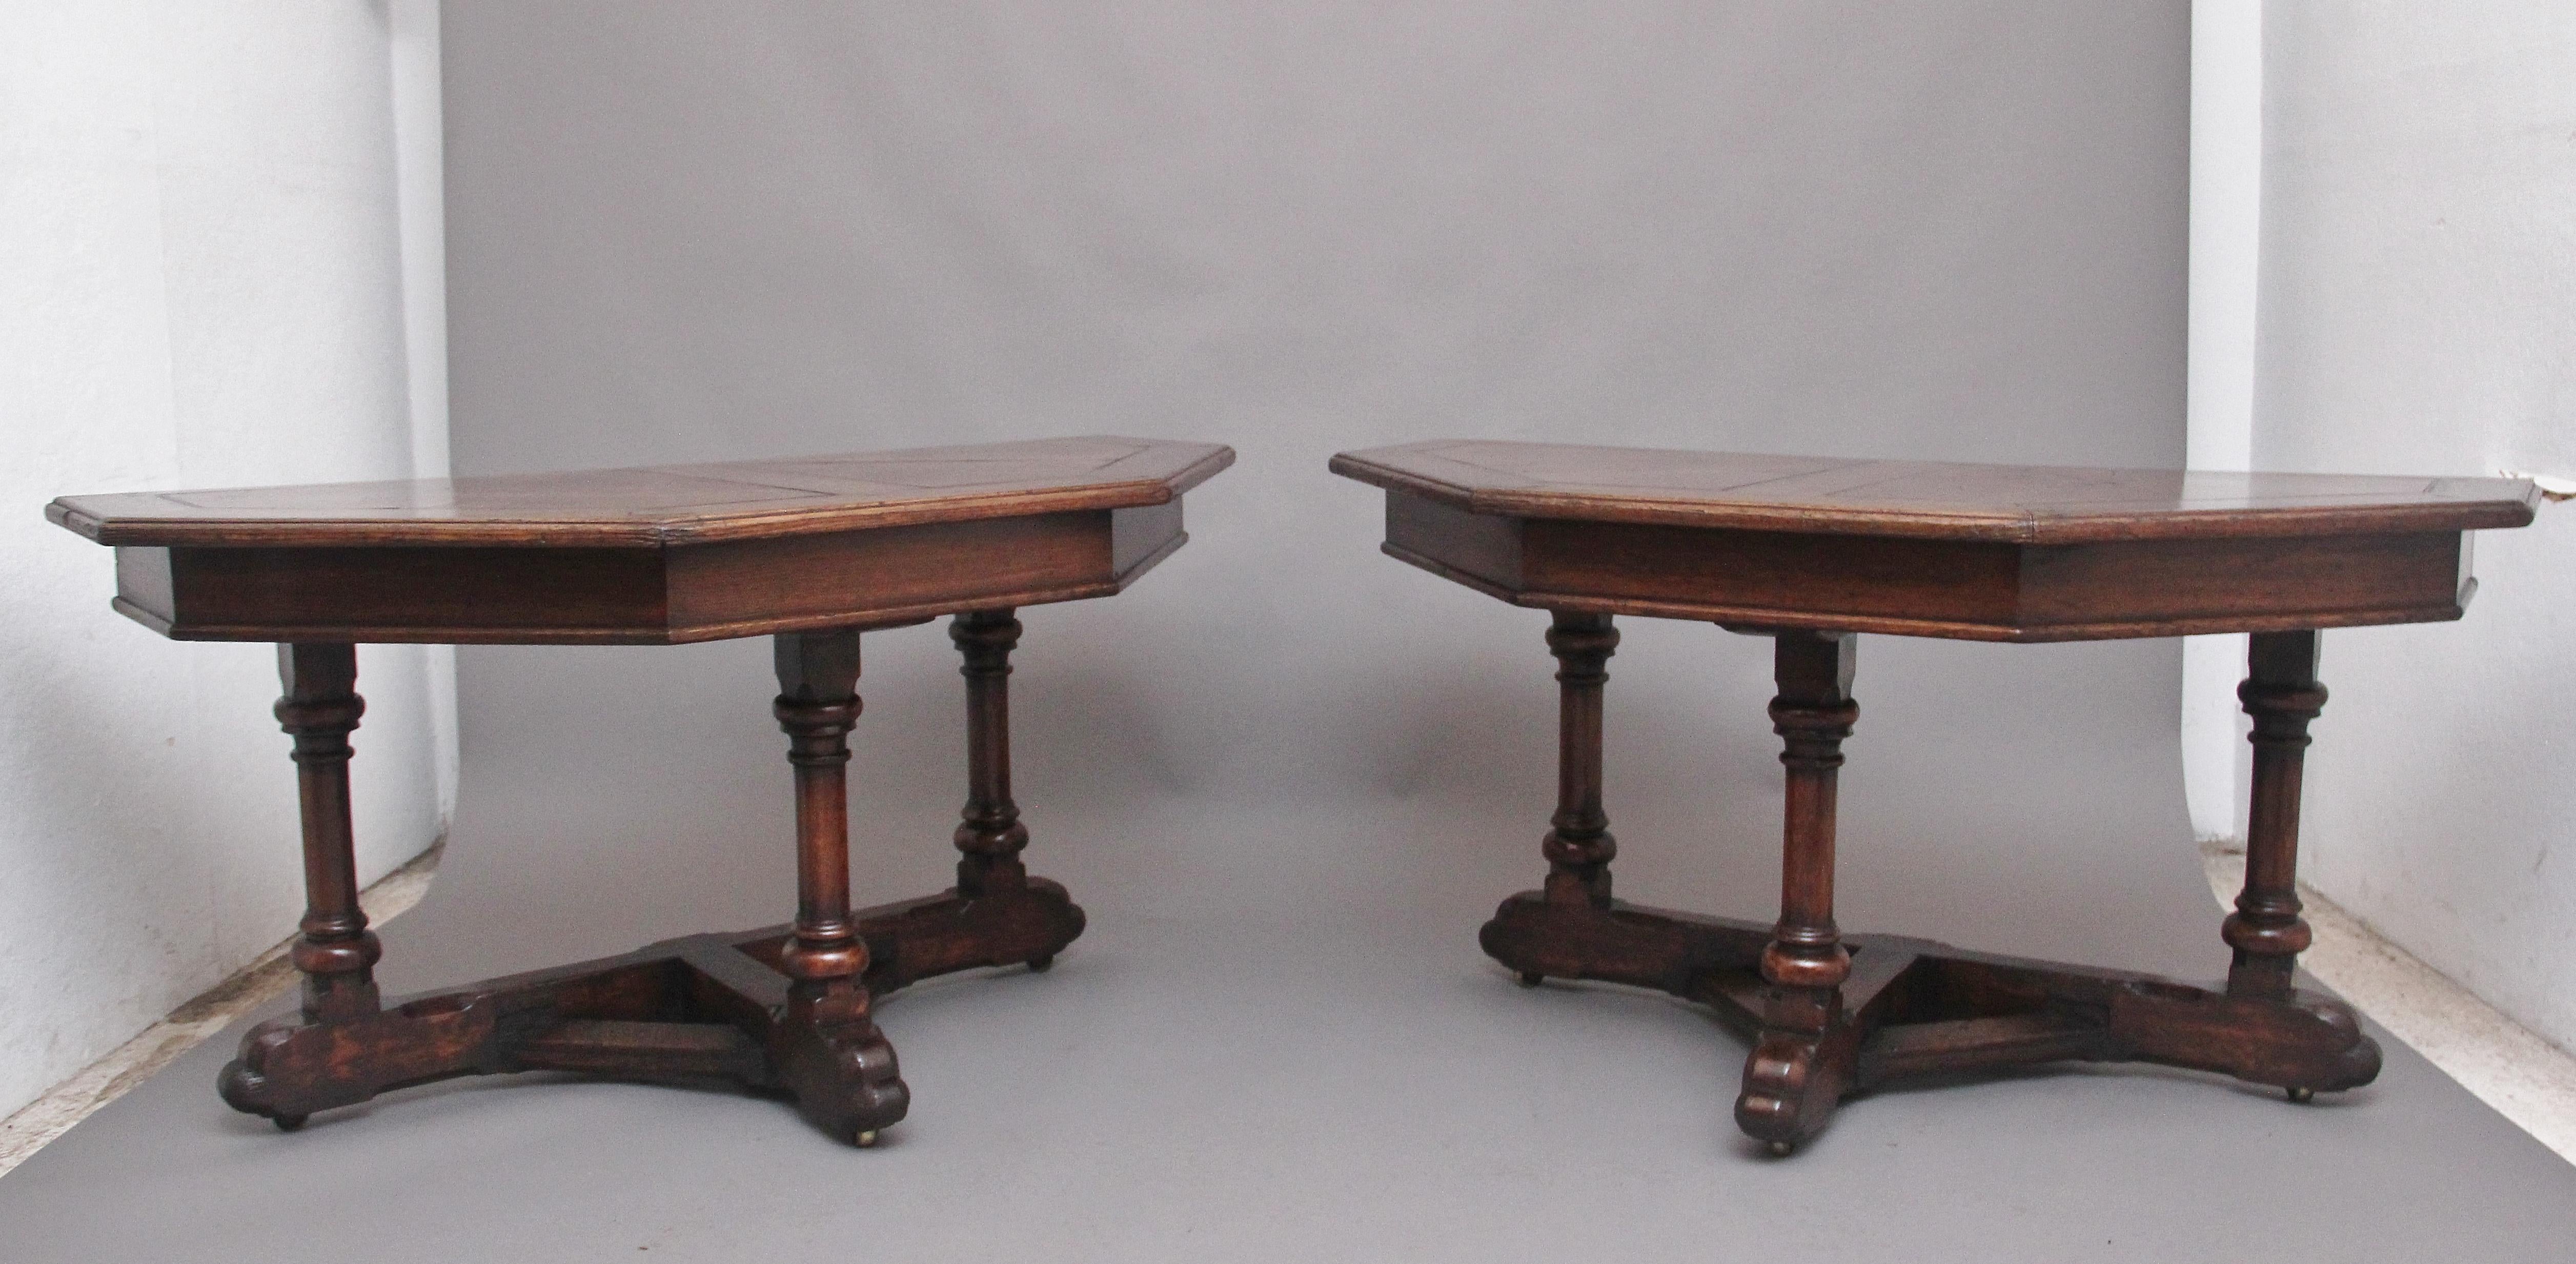 A pair of early 19th century oak console tables / centre table, having lovely shaped and figured tops consisting of two shaped panels on each table with a quadrant circle in the corner of each panel conforming when pushed together as a centre table,